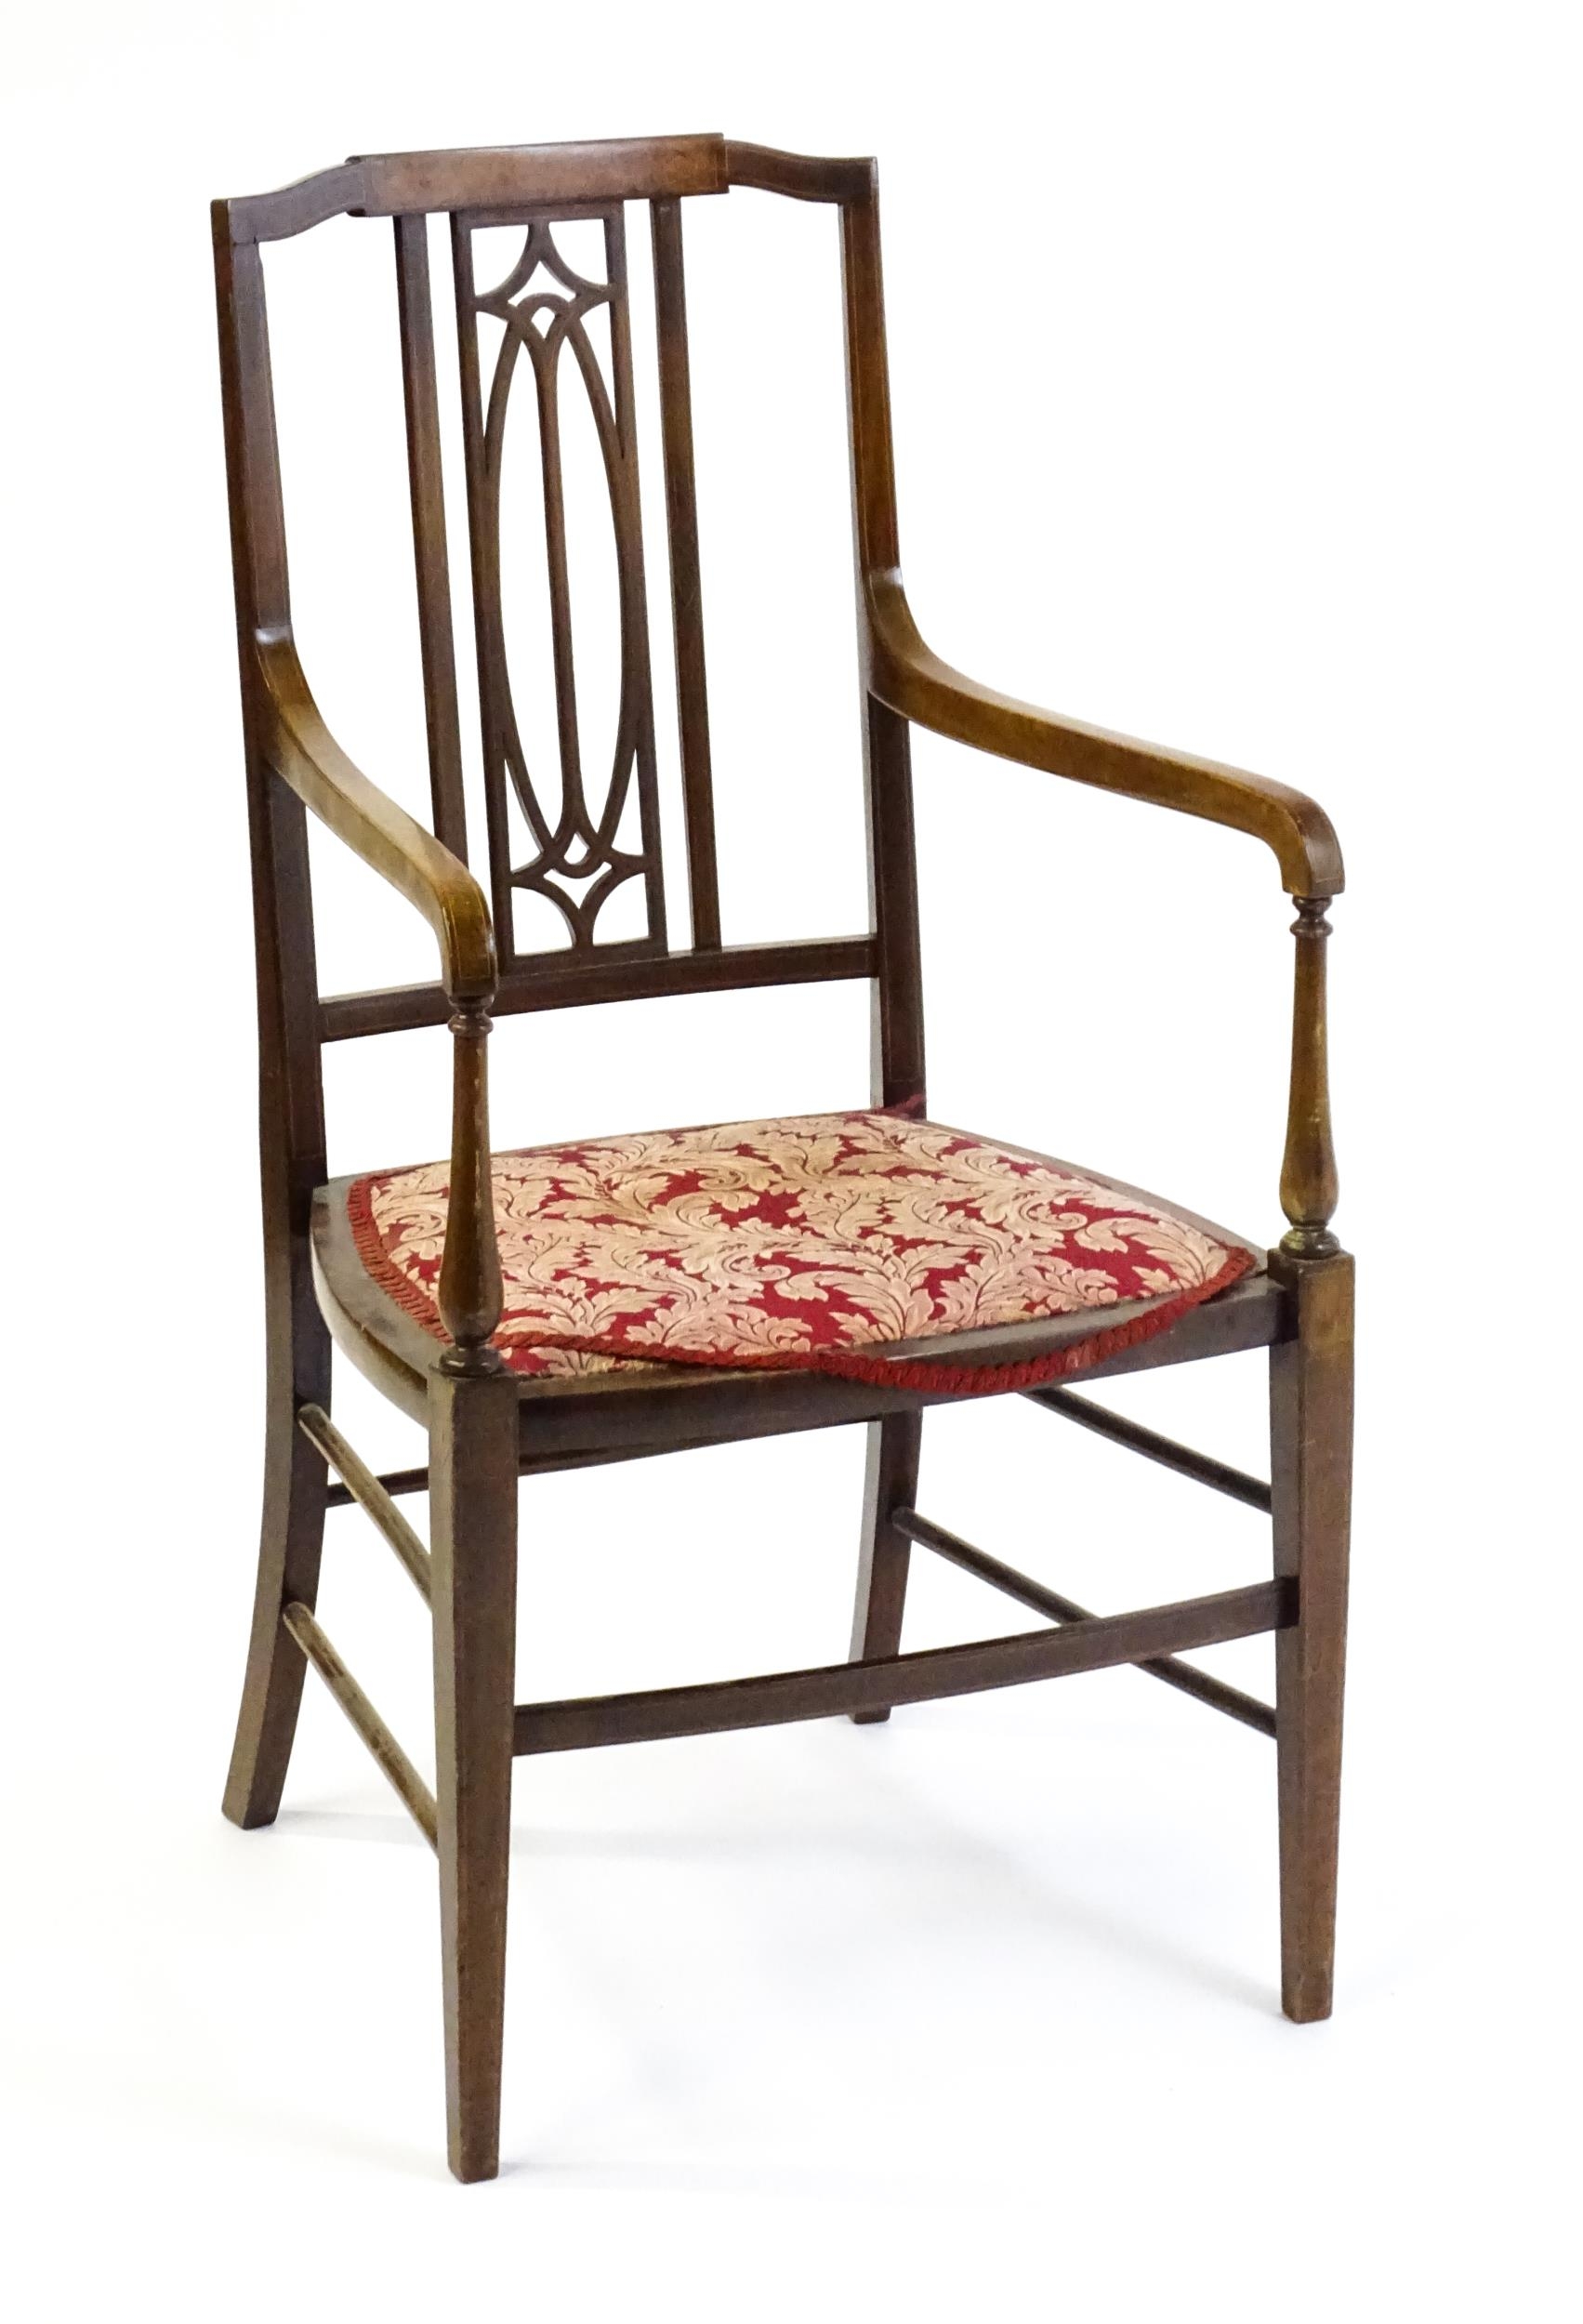 An Edwardian elbow chair with a burr walnut veneered top rail, a pierced back splat and swept arms